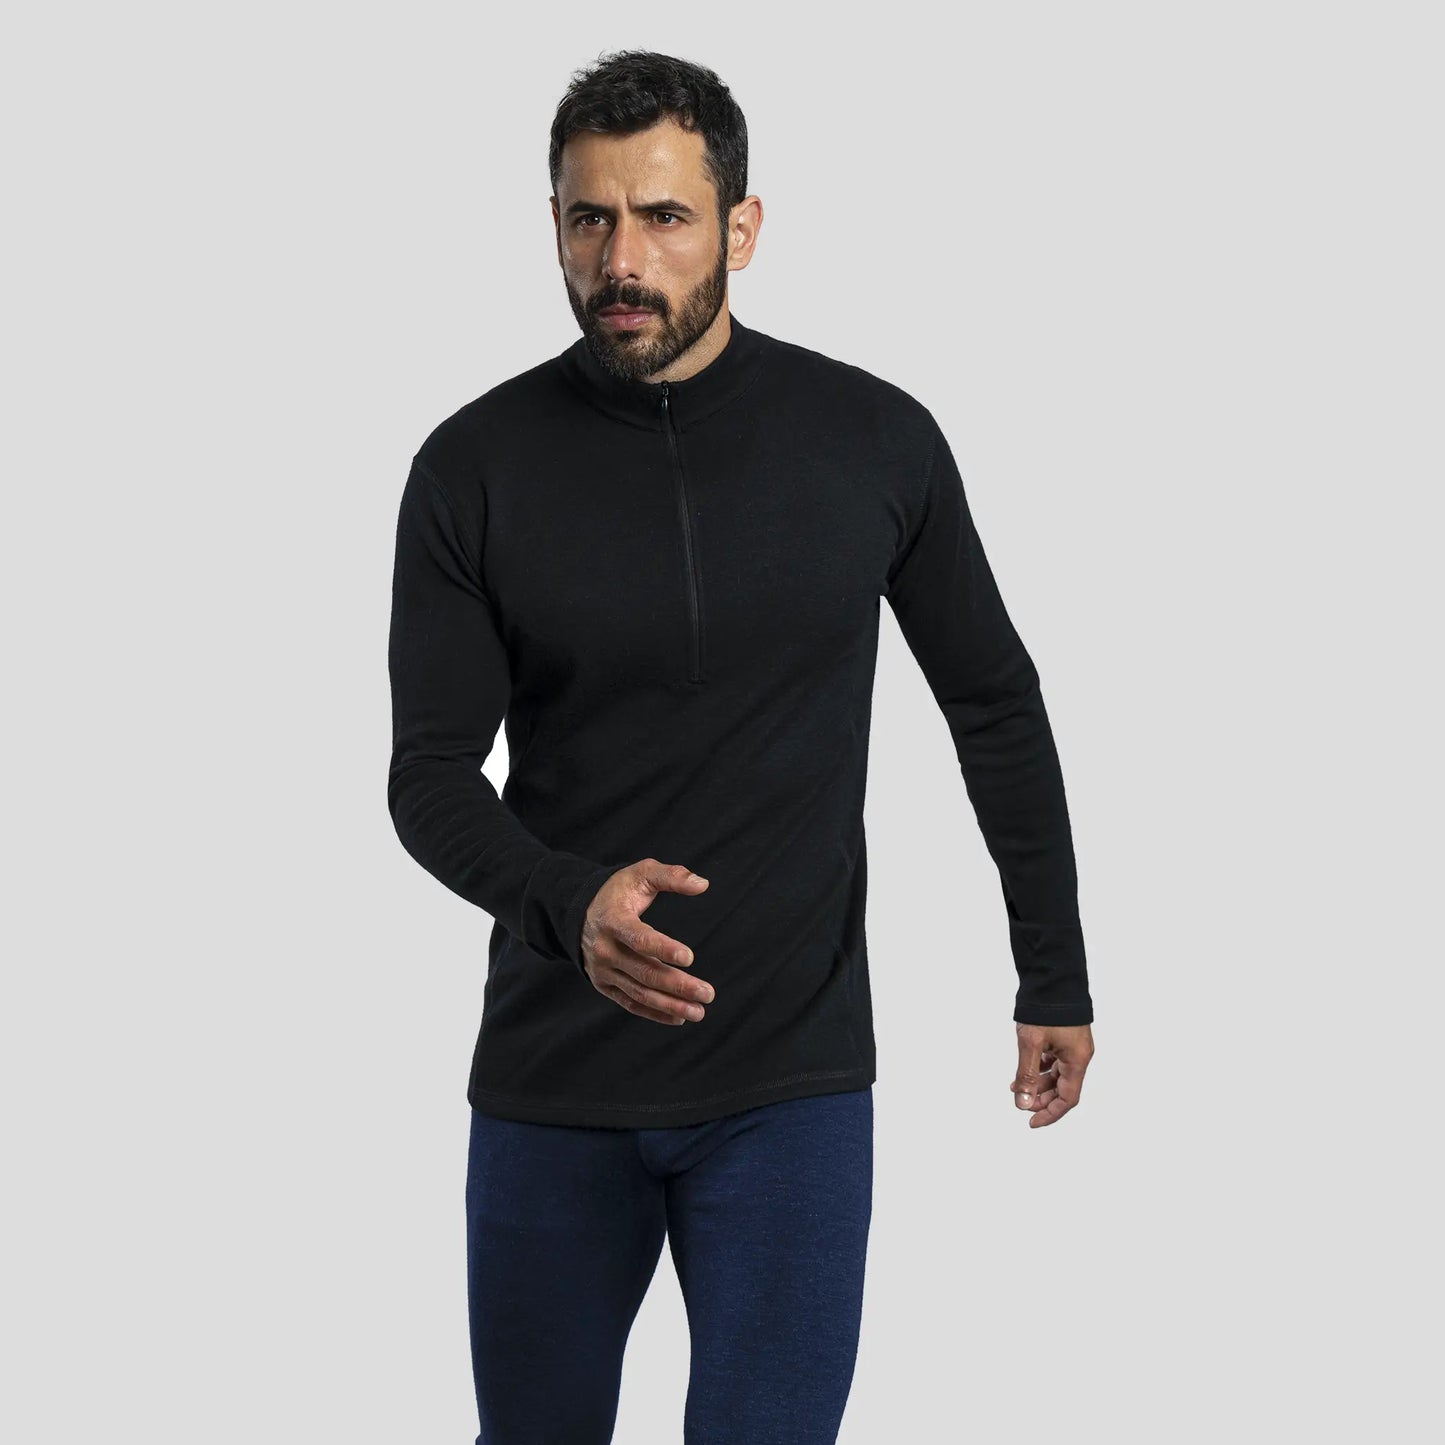 Men’s Alpaca Wool Base Layer: 230 Lightweight | Arms of Andes